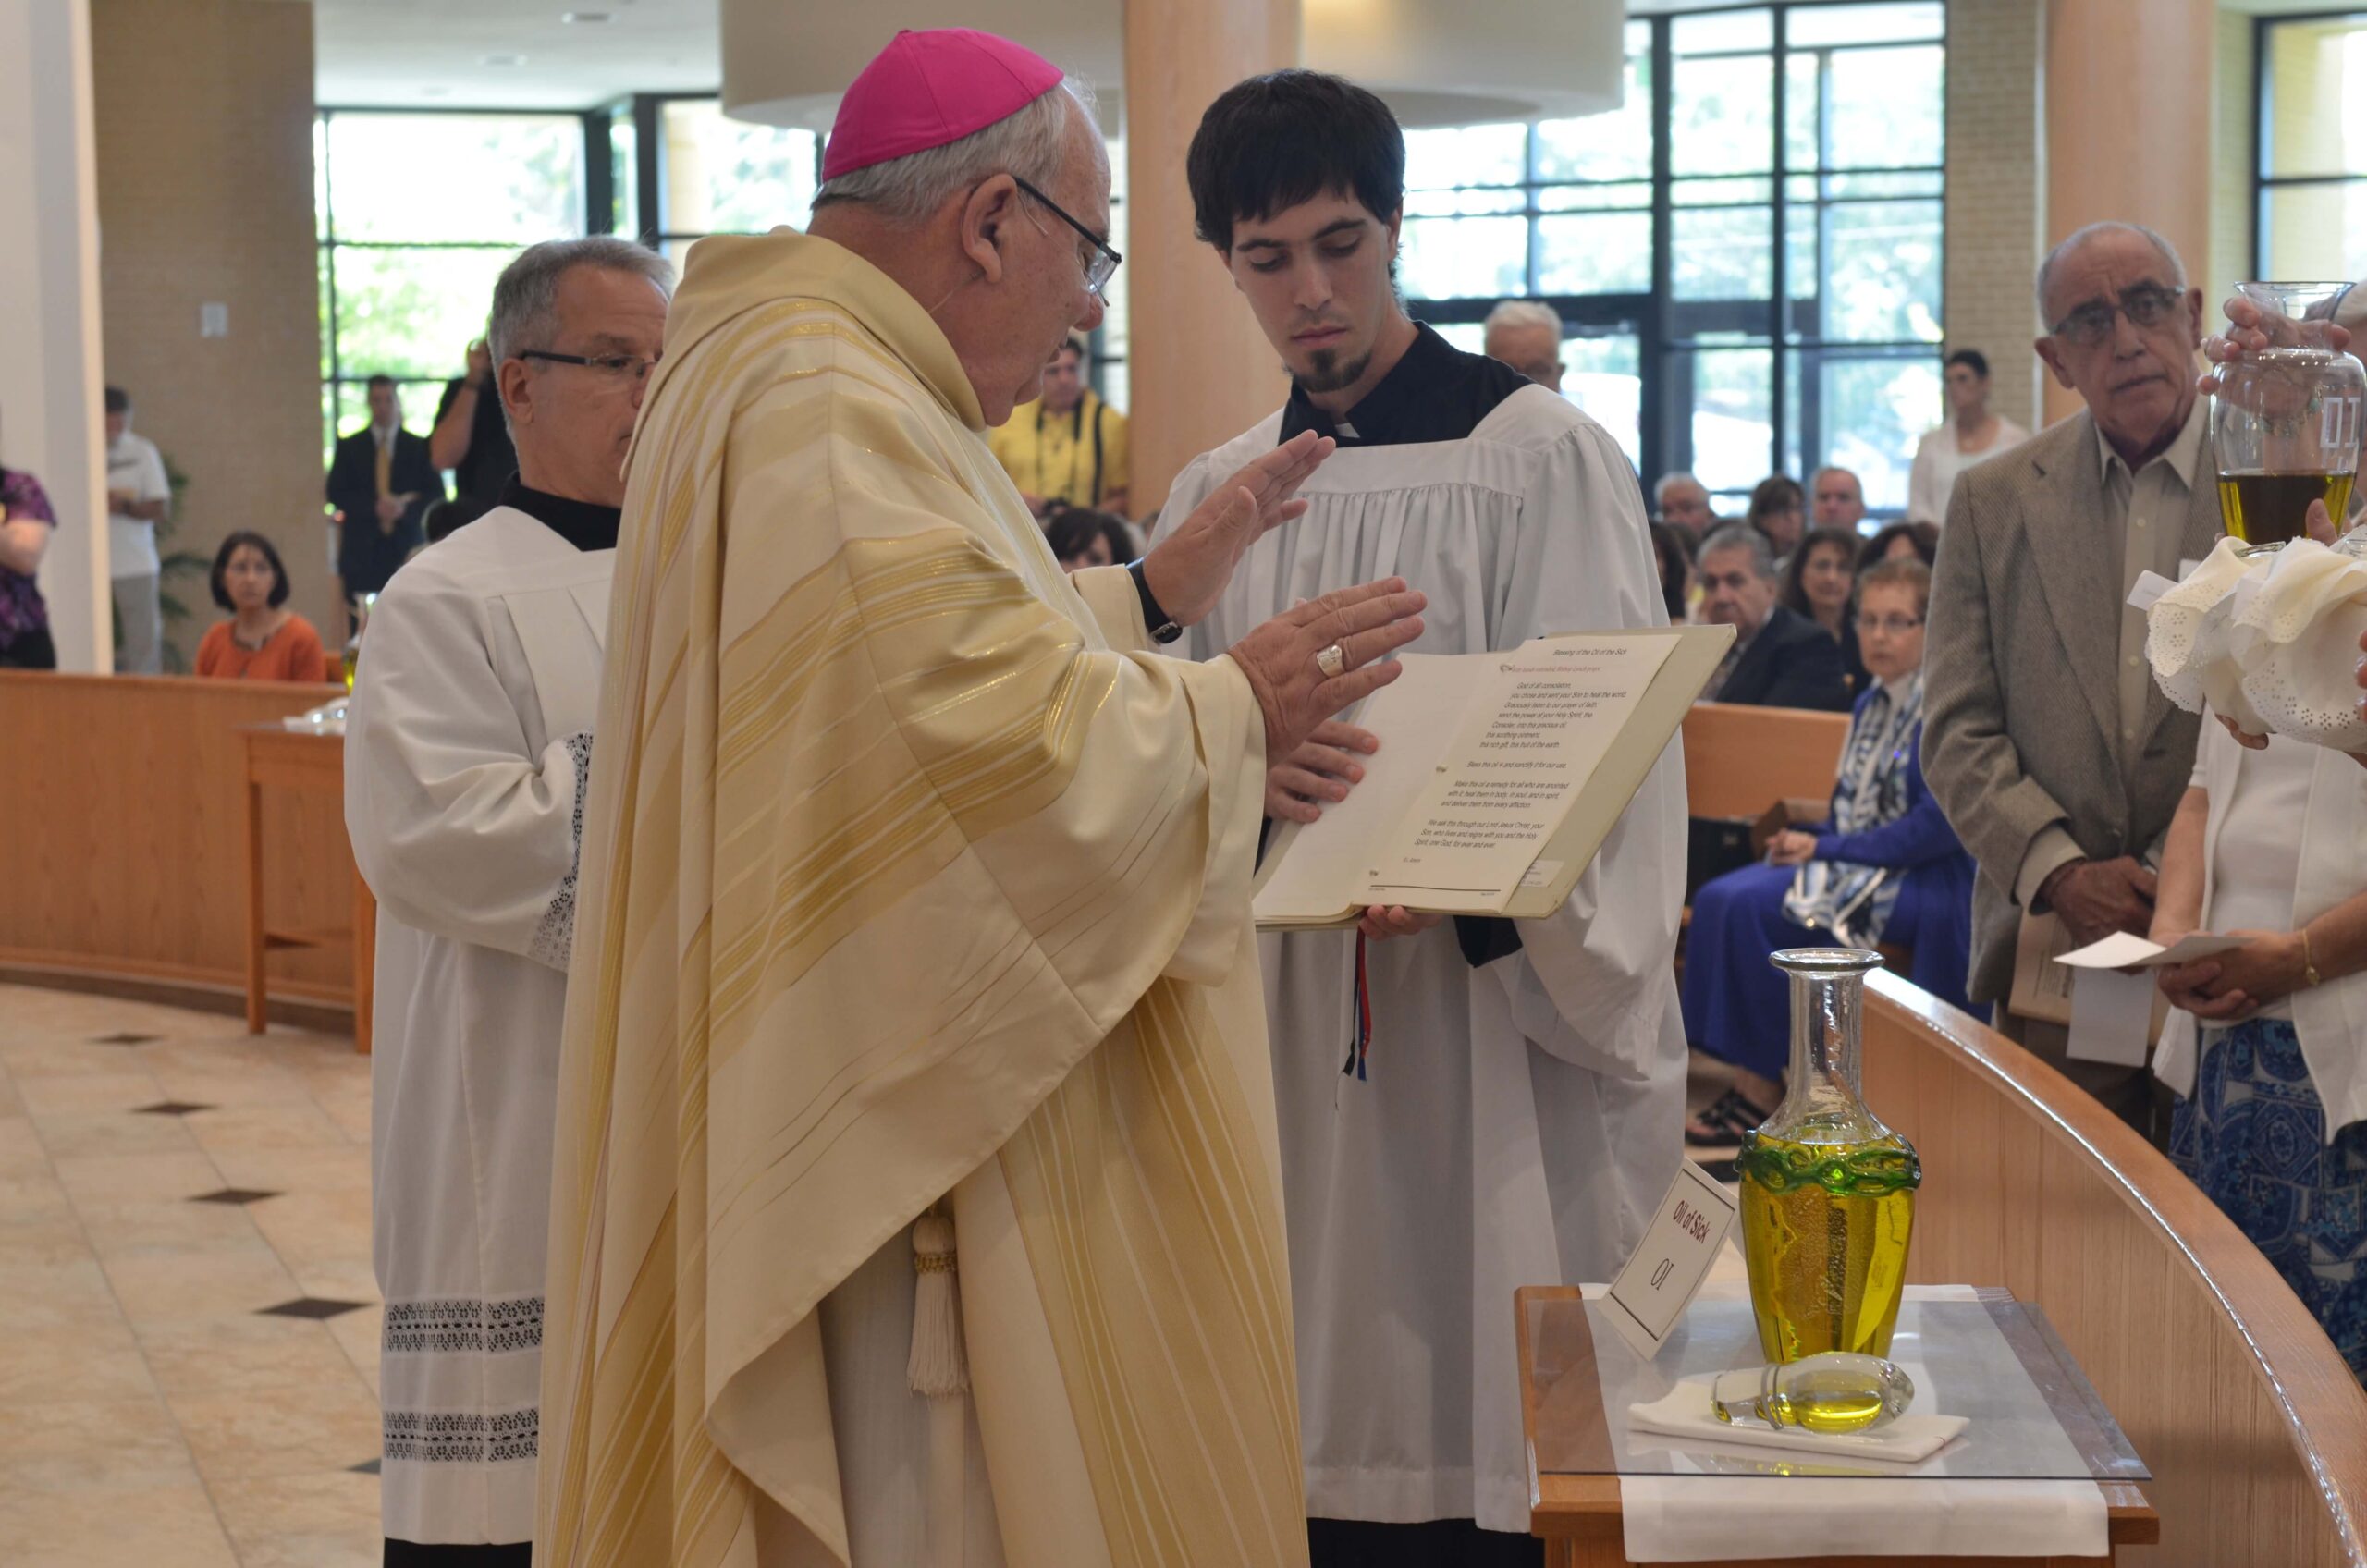 Bishop Lynch blessing the Oil of the Sick. Photo credit: Jeanne Smith.